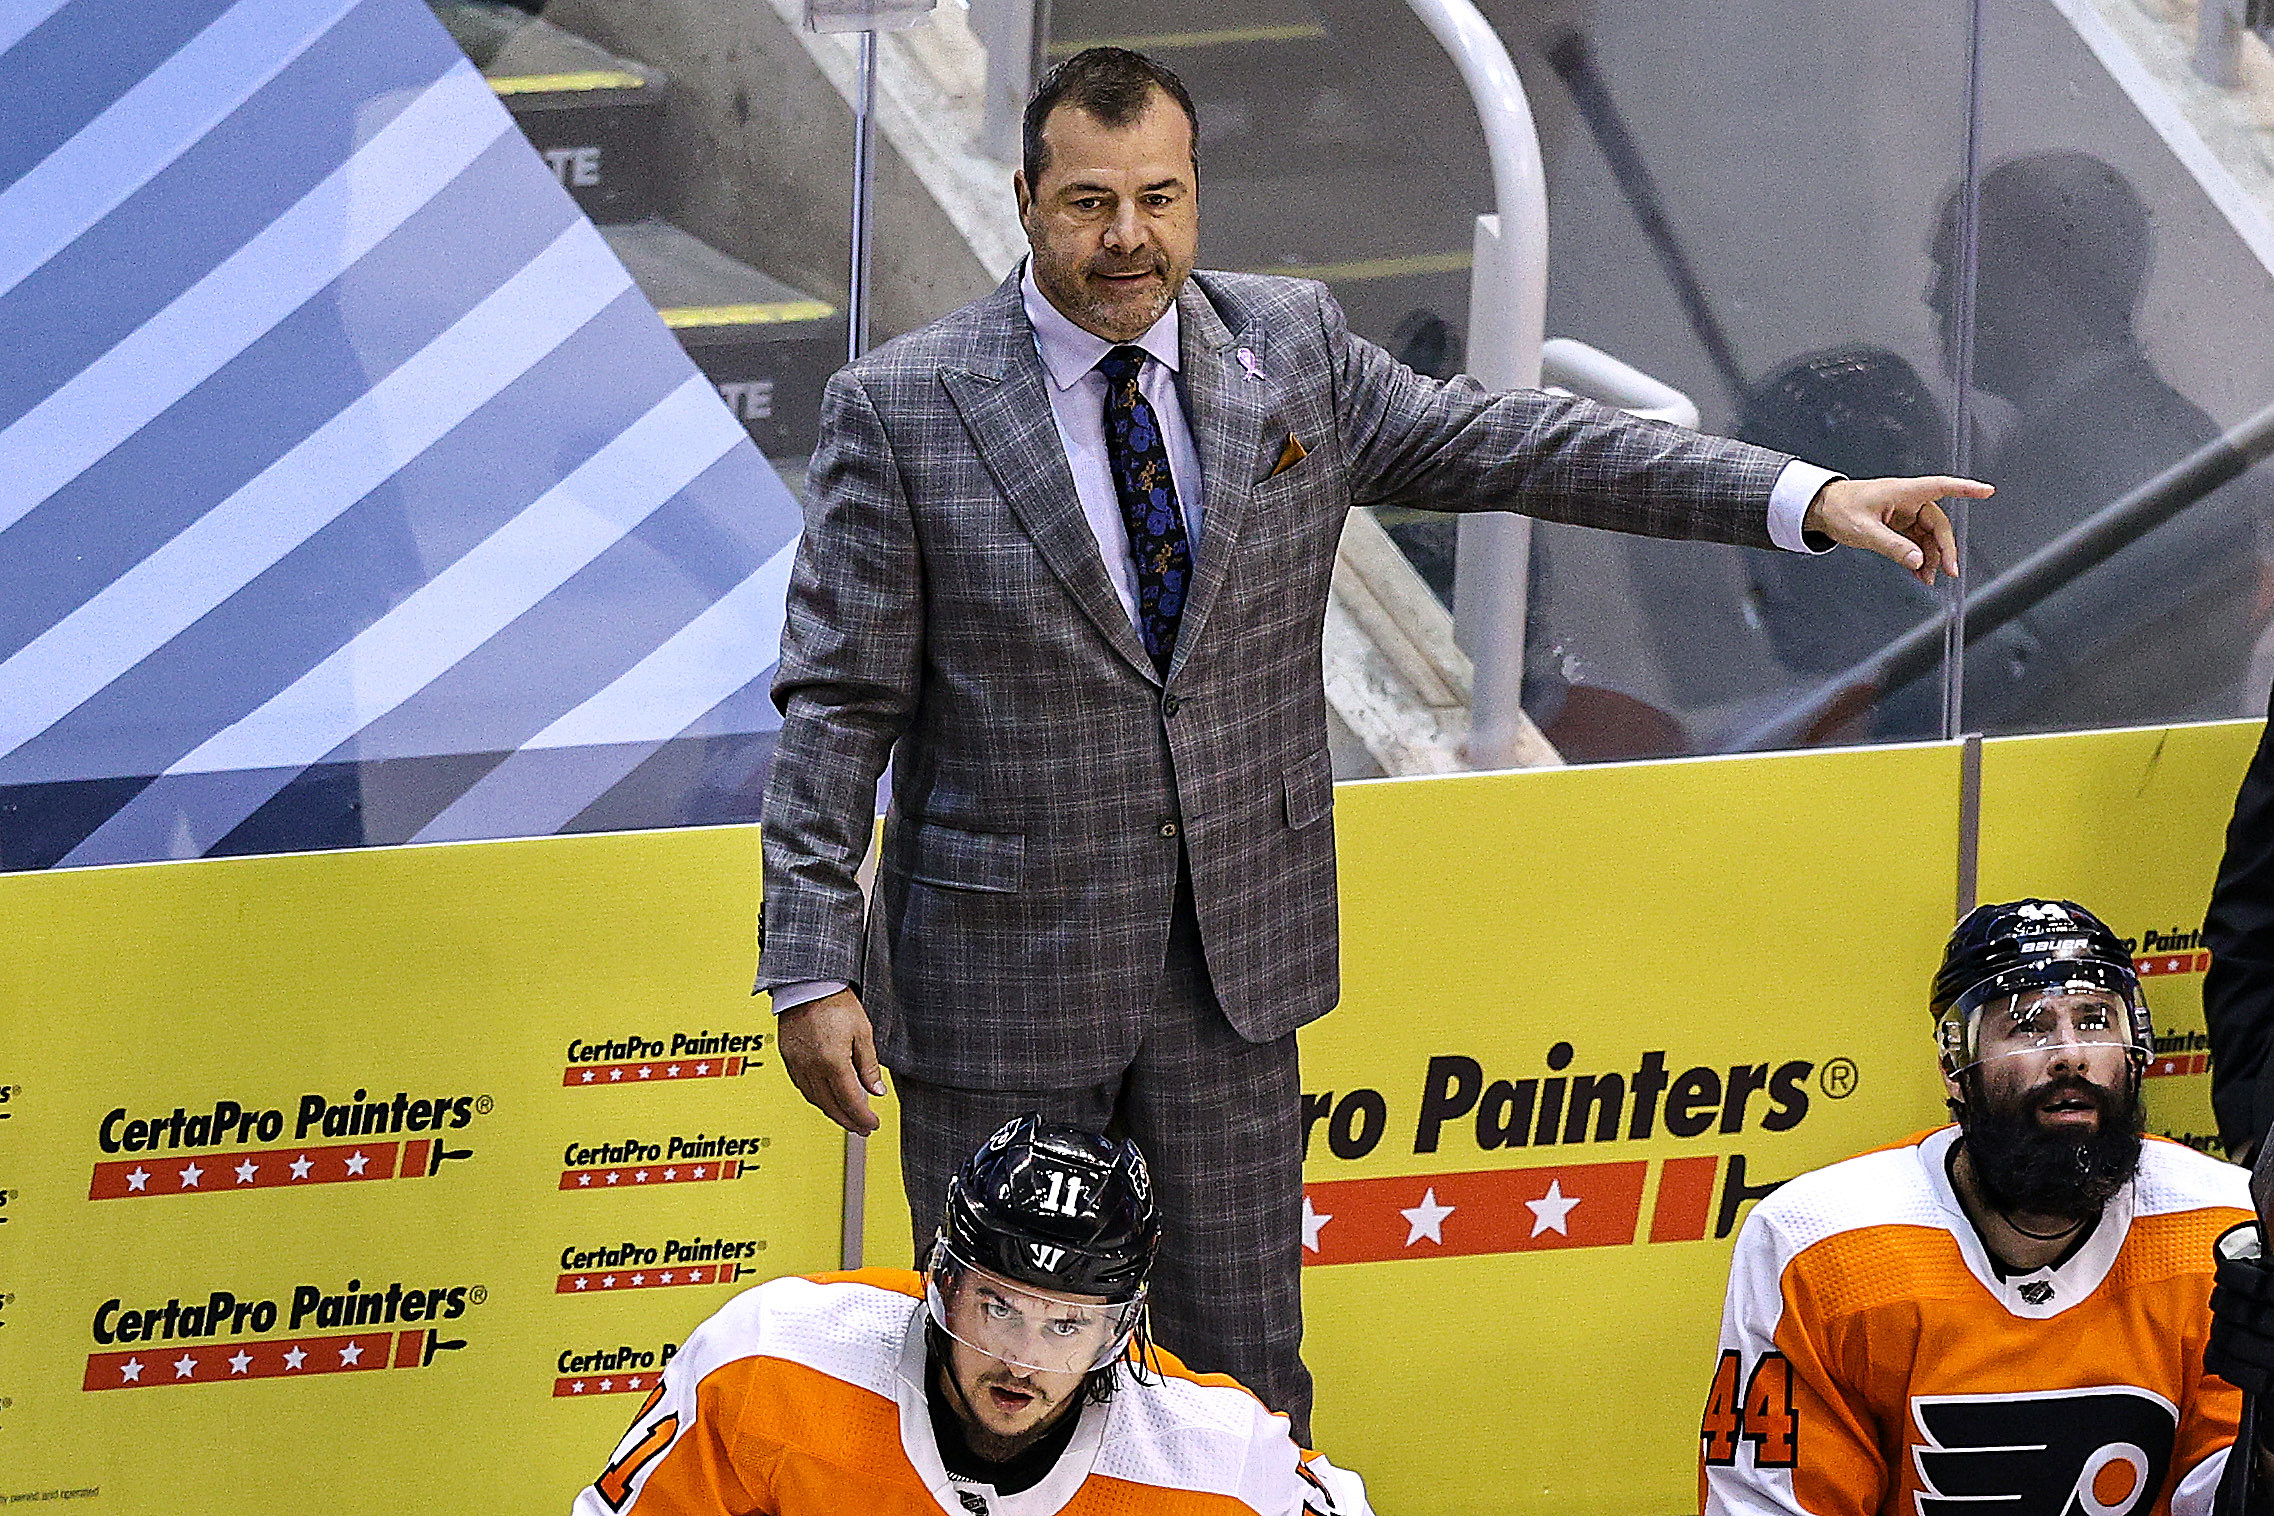 Every Flyers player, head coach Alain Vigneault to have cardboard